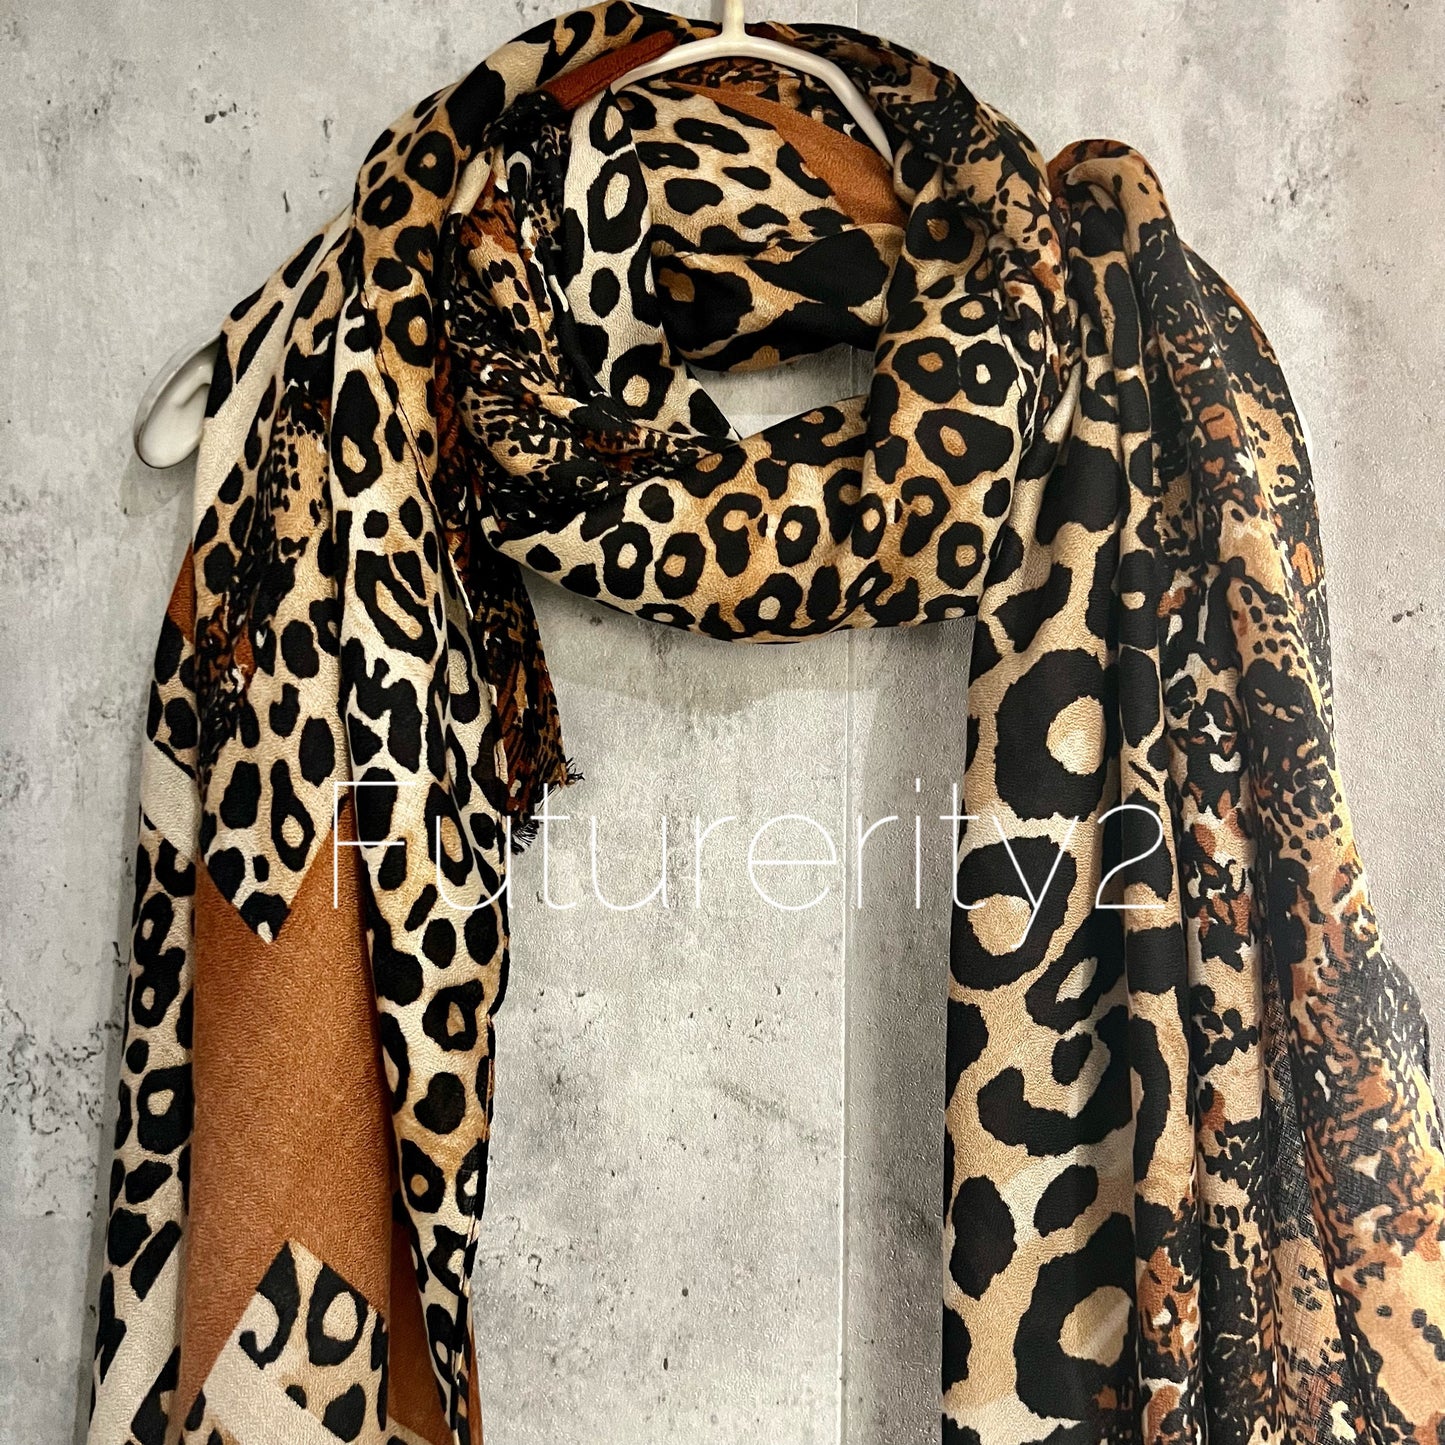 Leopard Pattern With Brown Lines Beige Cotton Scarf/Summer Autumn Winter Women Scarf/Gifts For Her Birthday Christmas/UK Seller